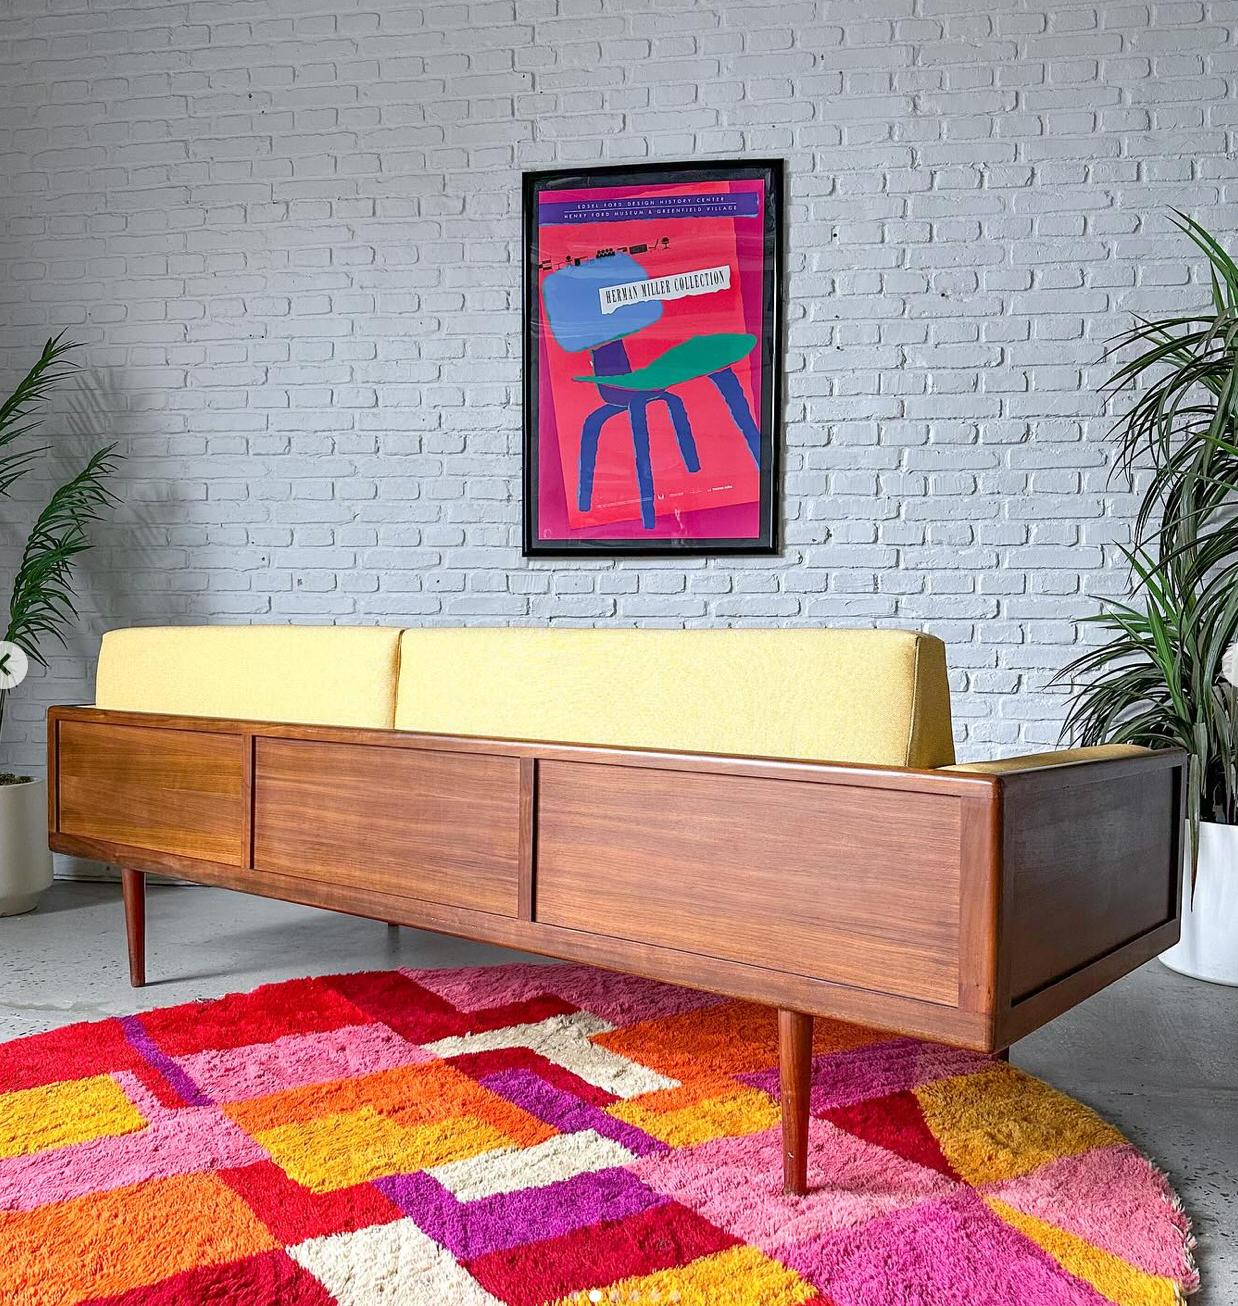 Rare solid walnut case sofa by American designer, Mel Smilow.  Mel Smilow is a lesser know designer from the mid century time period, but he created some amazing minimalist but beautifully crafted designs.  In our opinion, his work should be revered